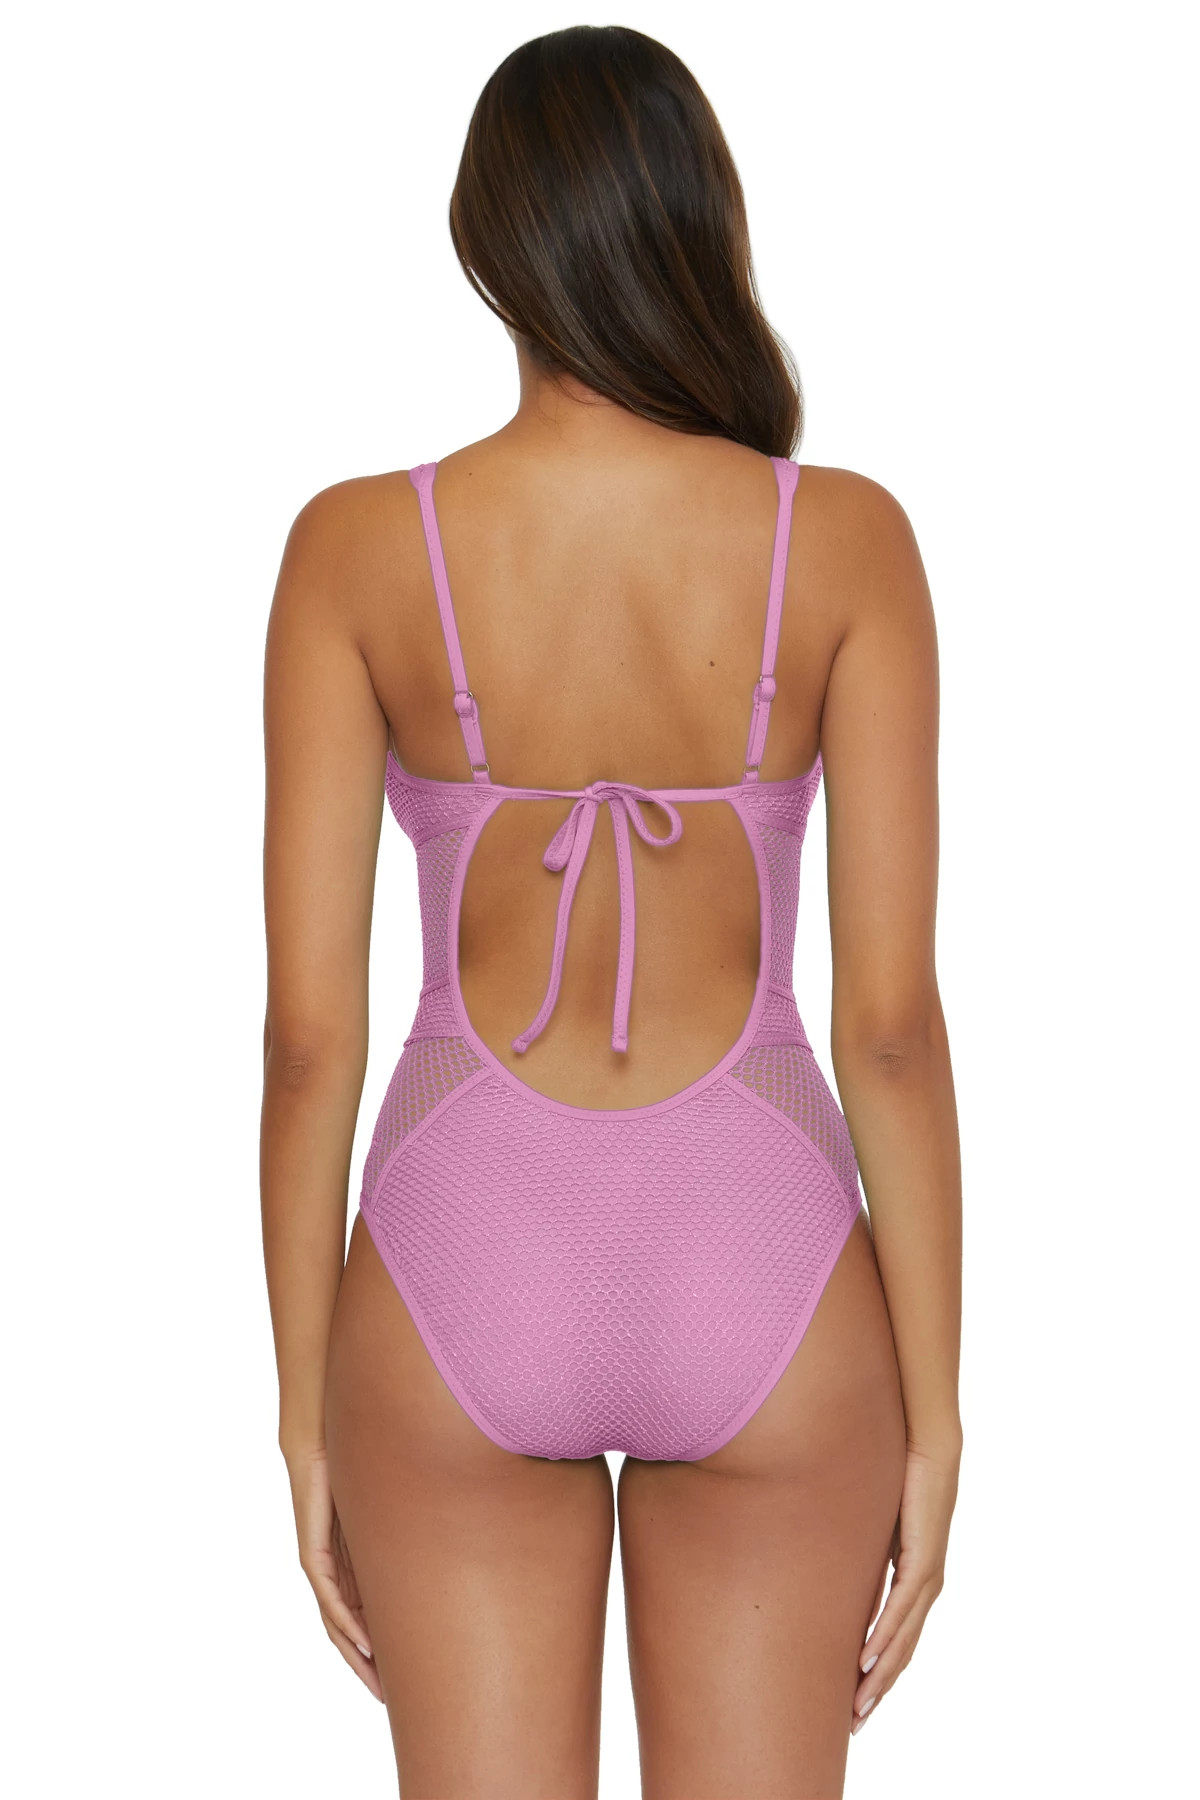 MALVA Show & Tell Plunge One Piece Swimsuit image number 2